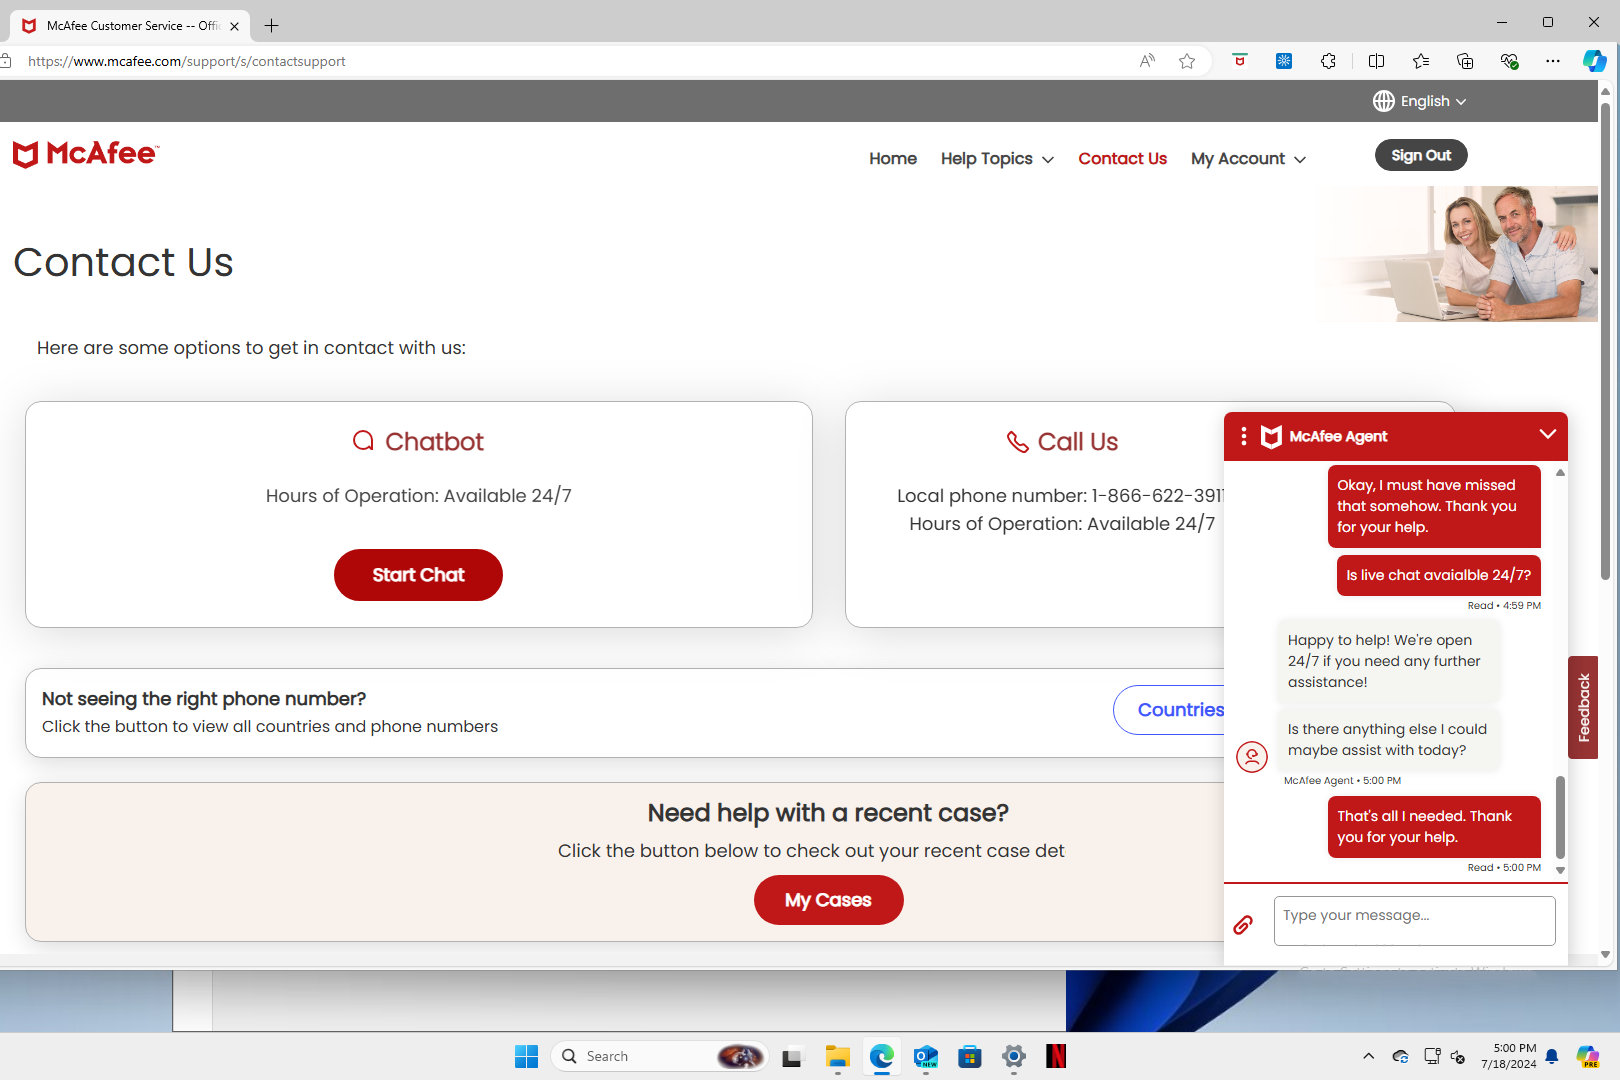 McAfee support is via phone or live chat and it's always available.